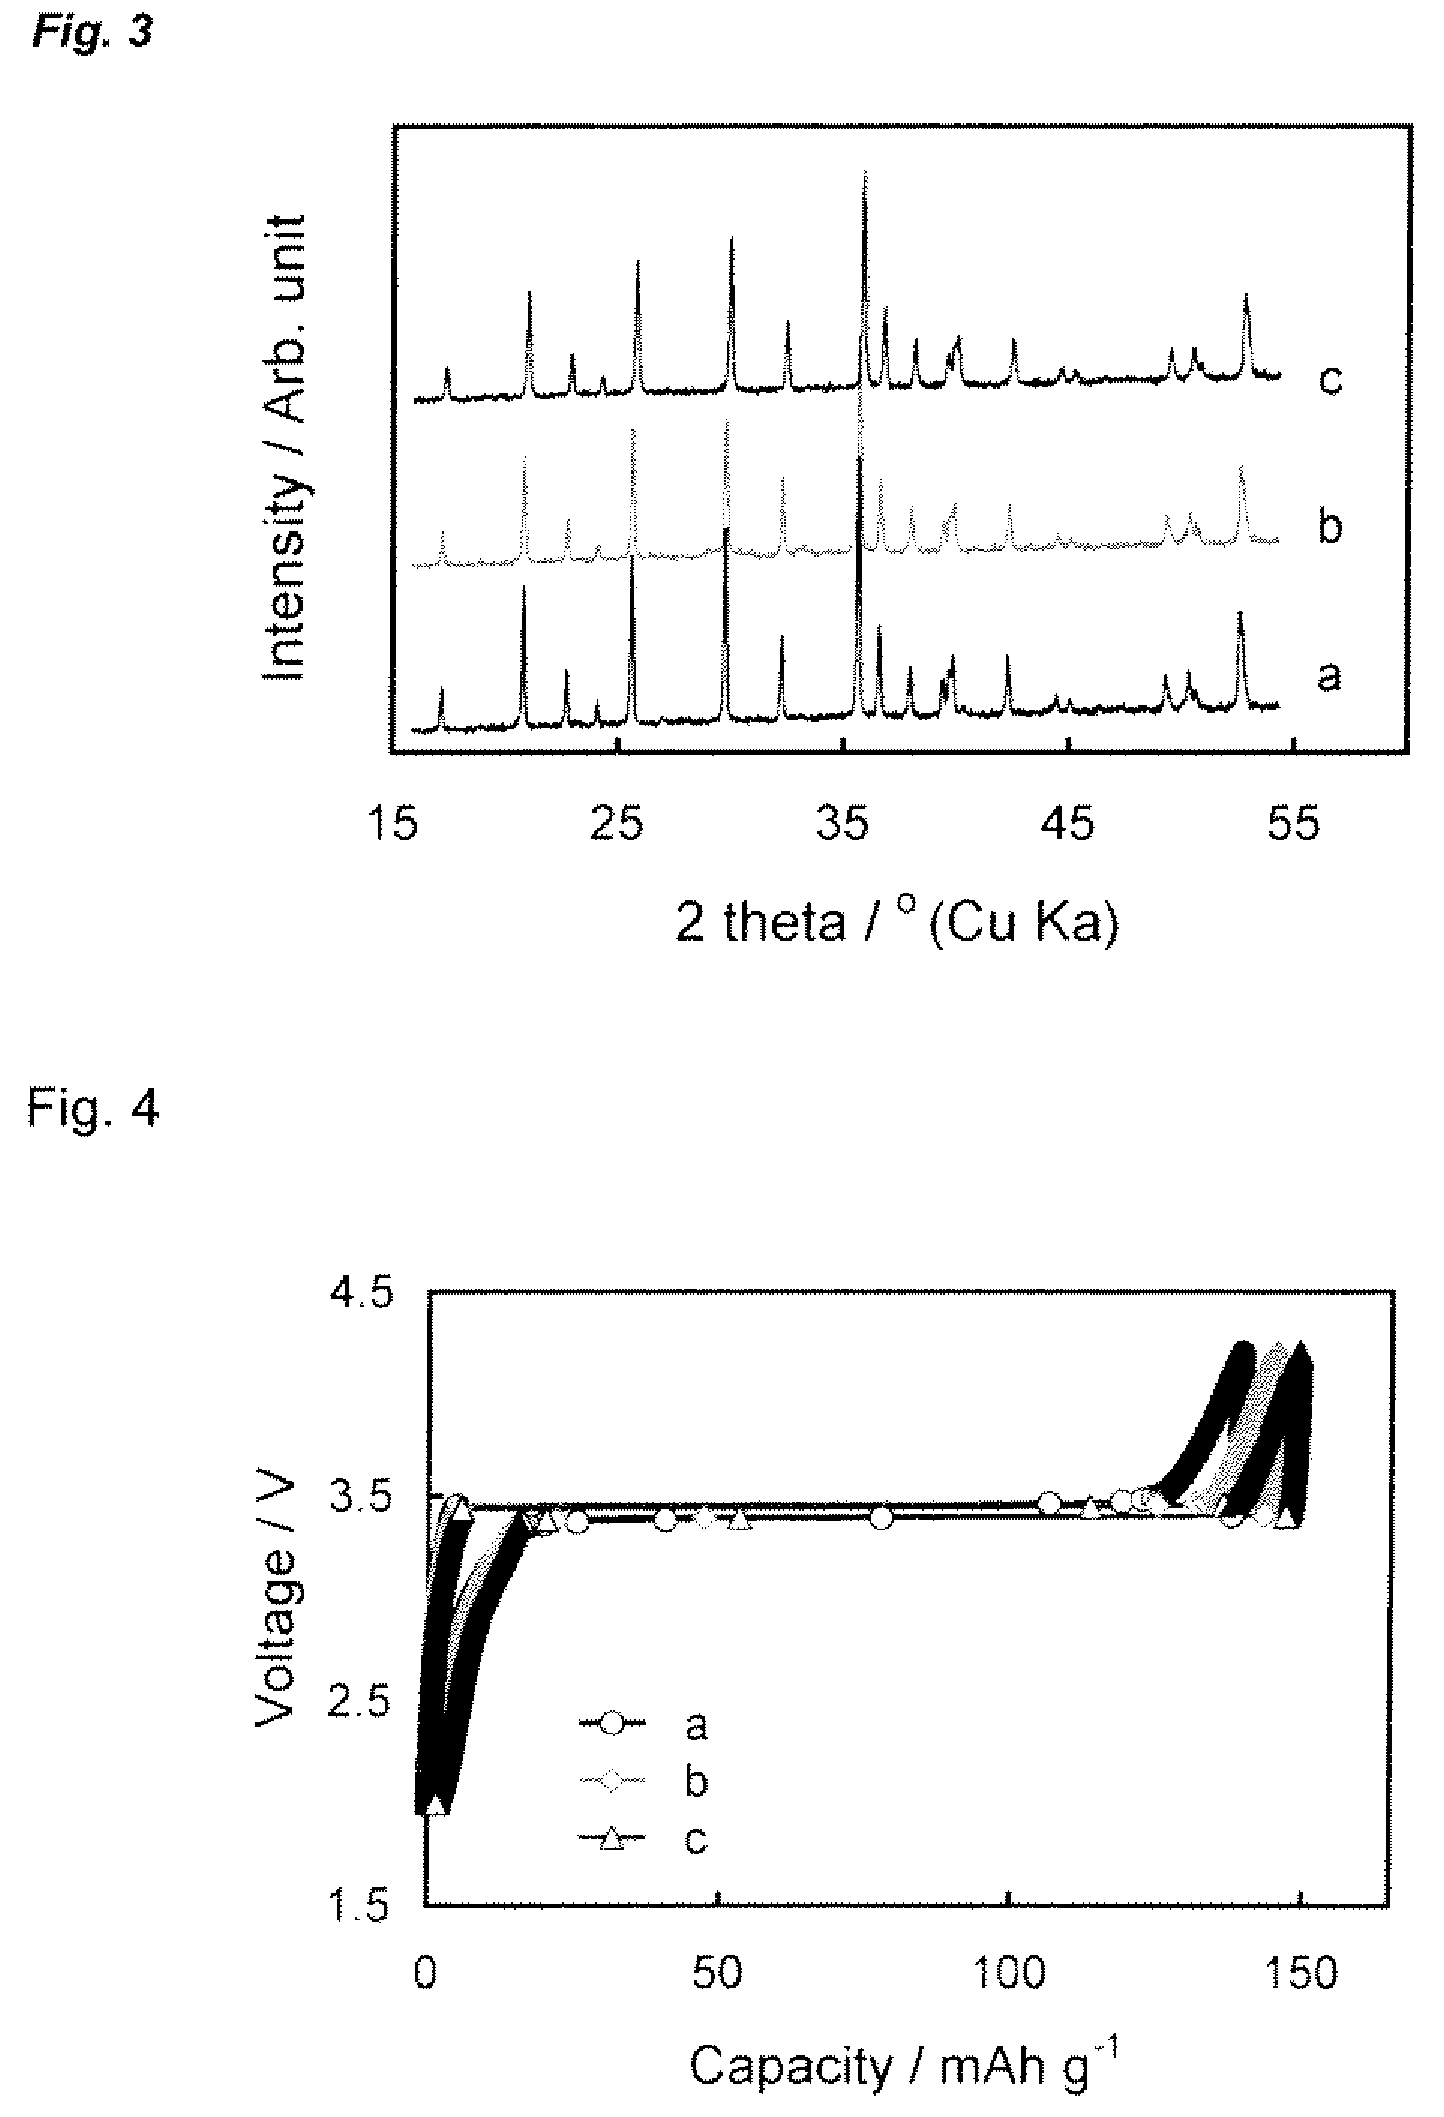 Method of preparing a composite cathode active material for rechargeable electrochemical cell